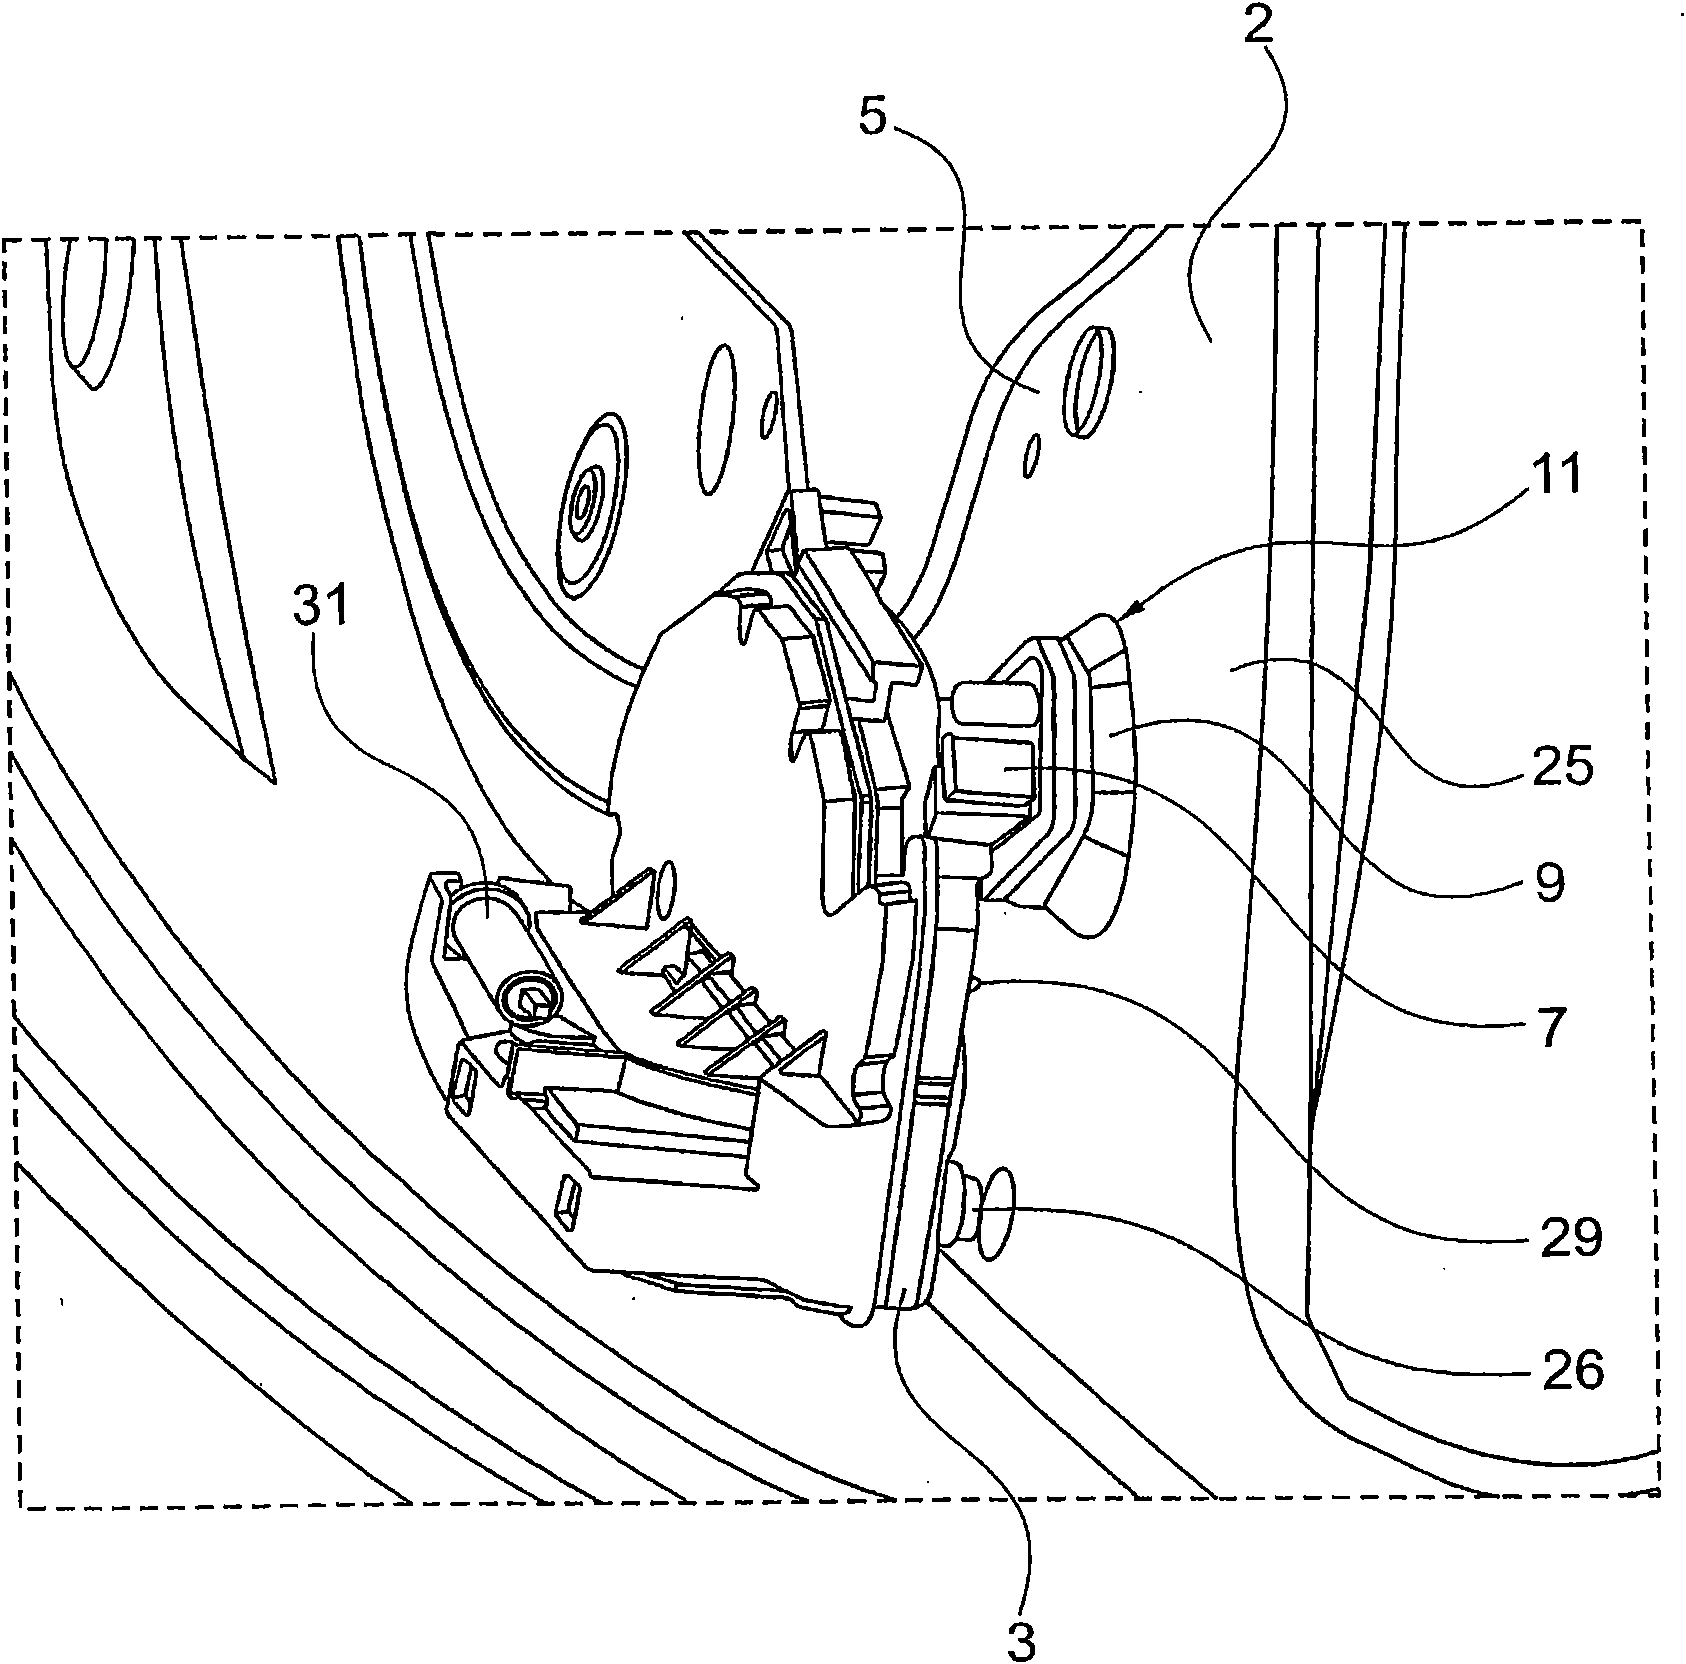 Device for implementing a dry electrical connection of a motor vehicle lock